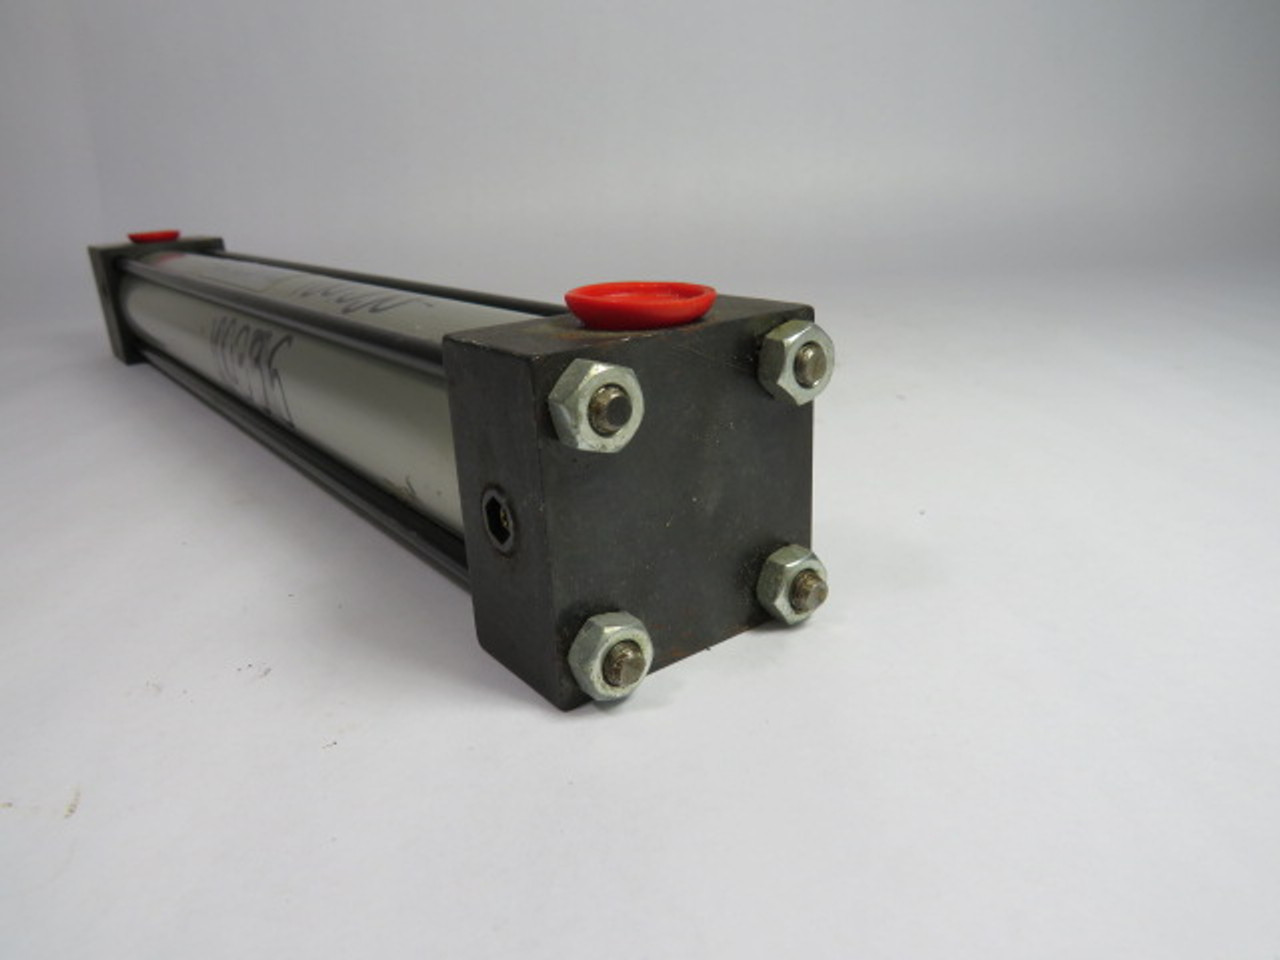 Norgren J0177A1-1-1/2X12 Pneumatic Cylinder 1-1/2" Bore 12" Stroke USED